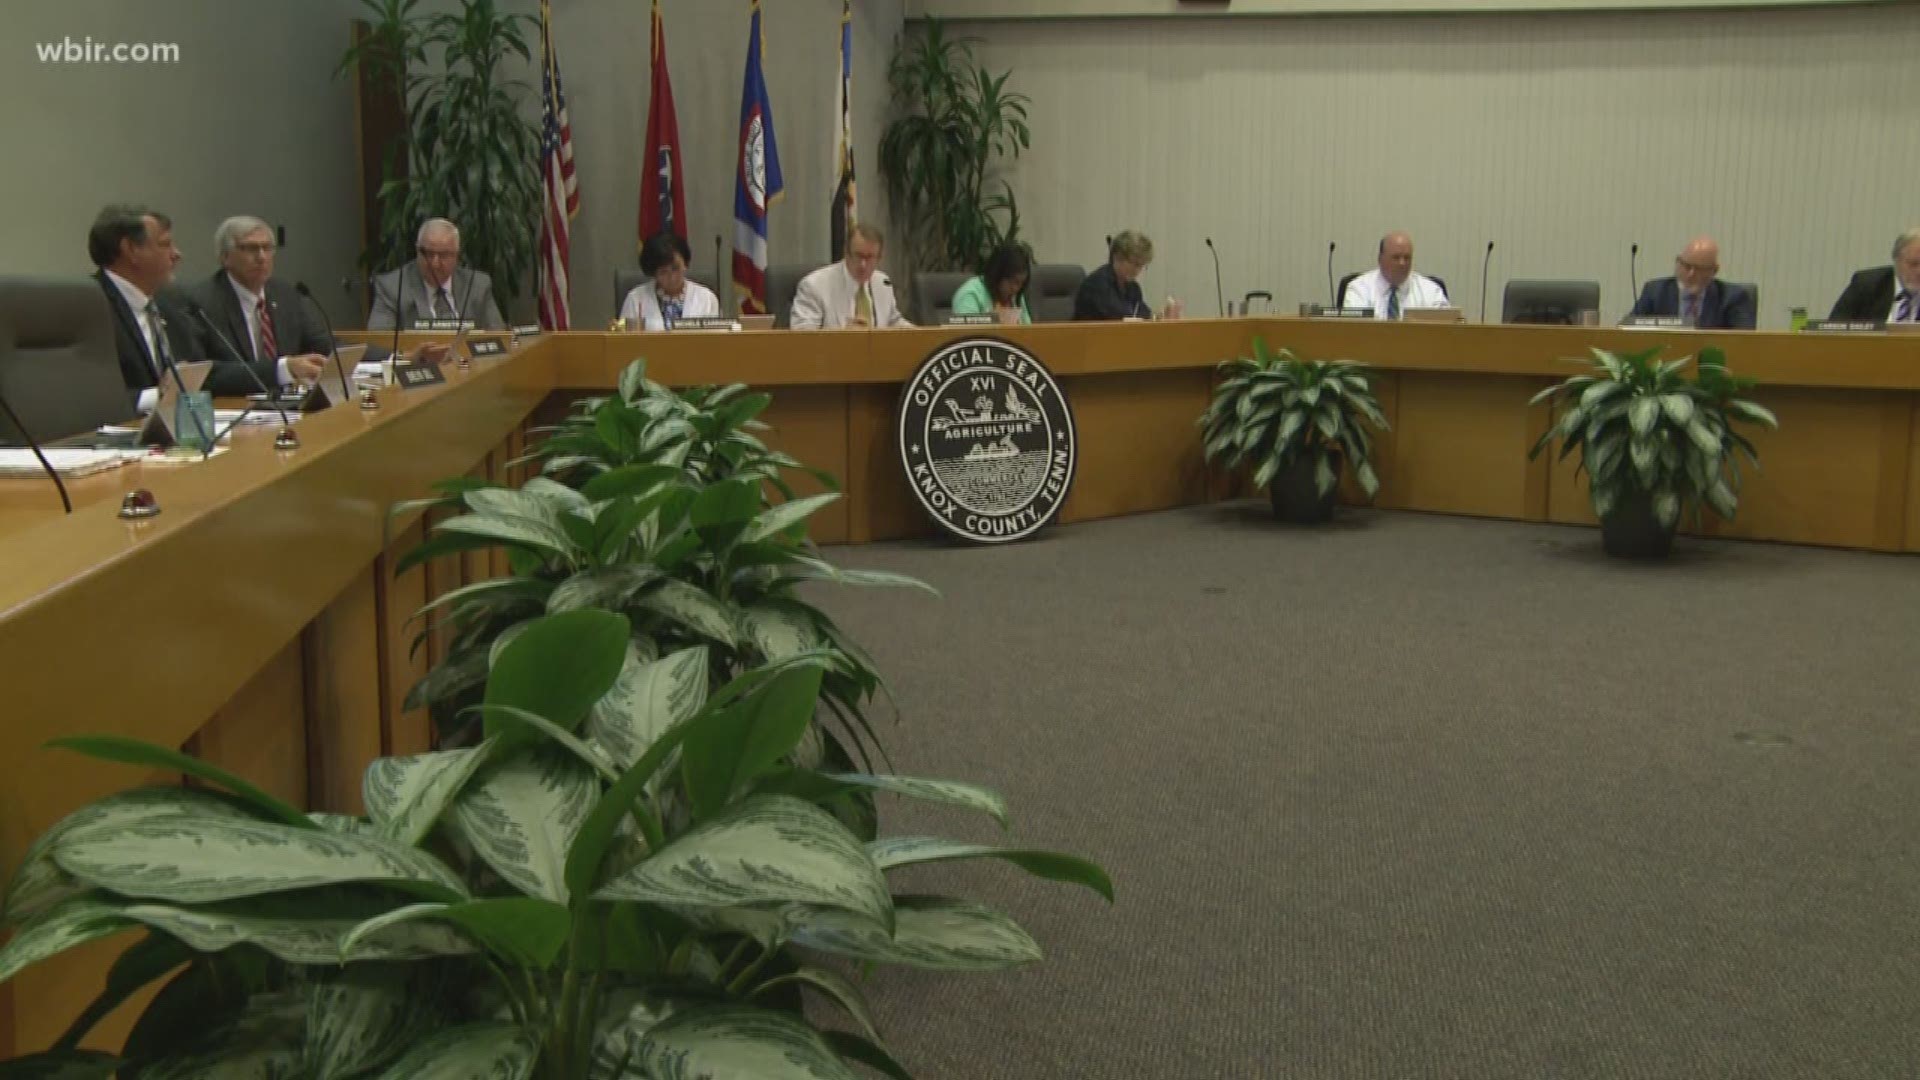 The Knox County commission passed a resolution denouncing the threats of violence against any group of citizens.